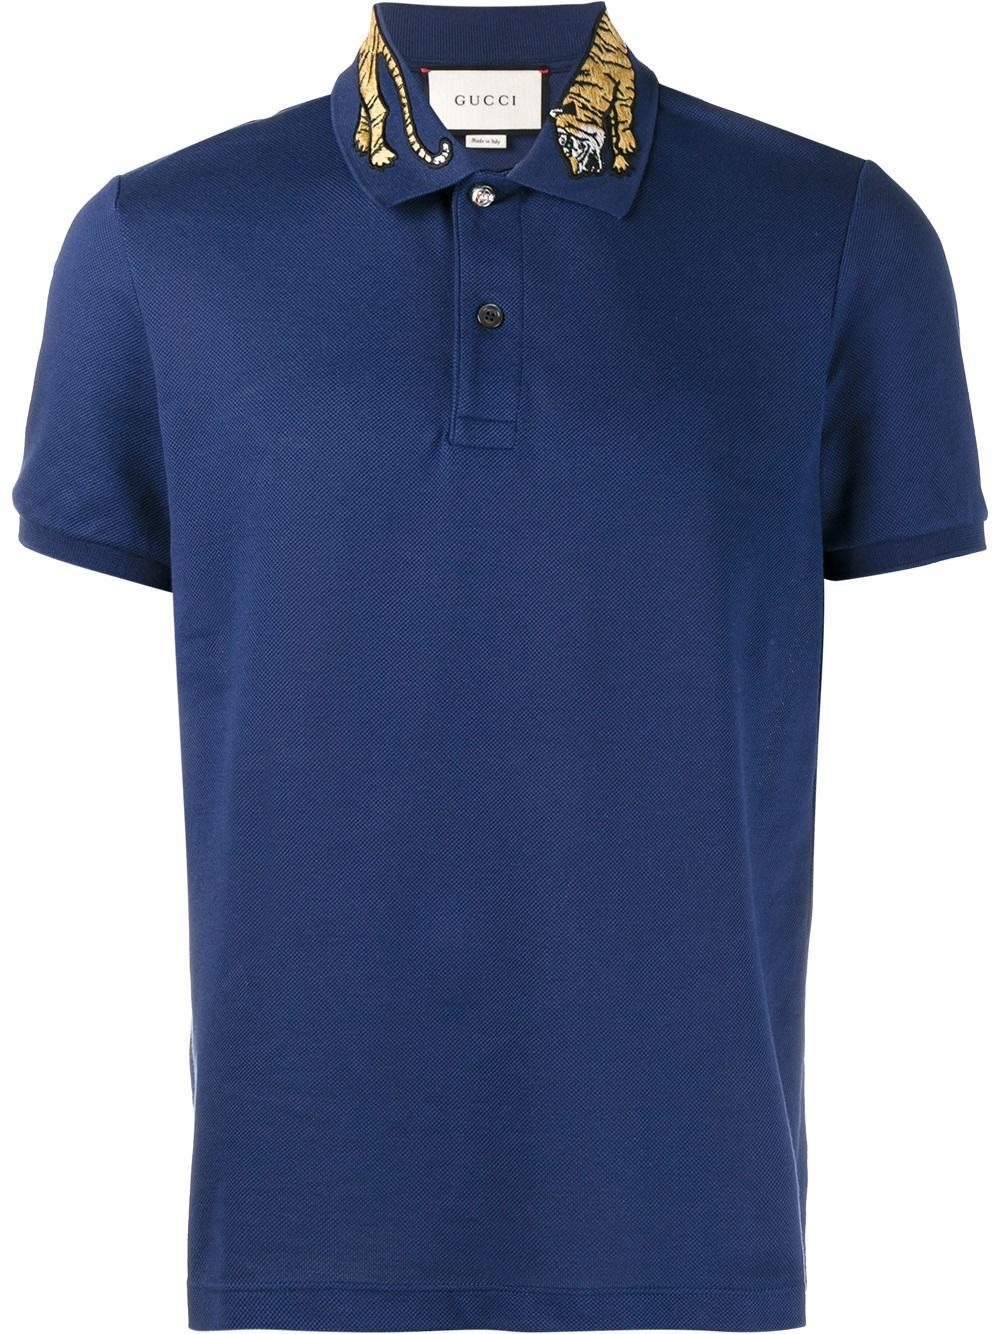 Gucci Tiger Embroidered Polo Shirt in Blue for Men - Save 14% | Lyst